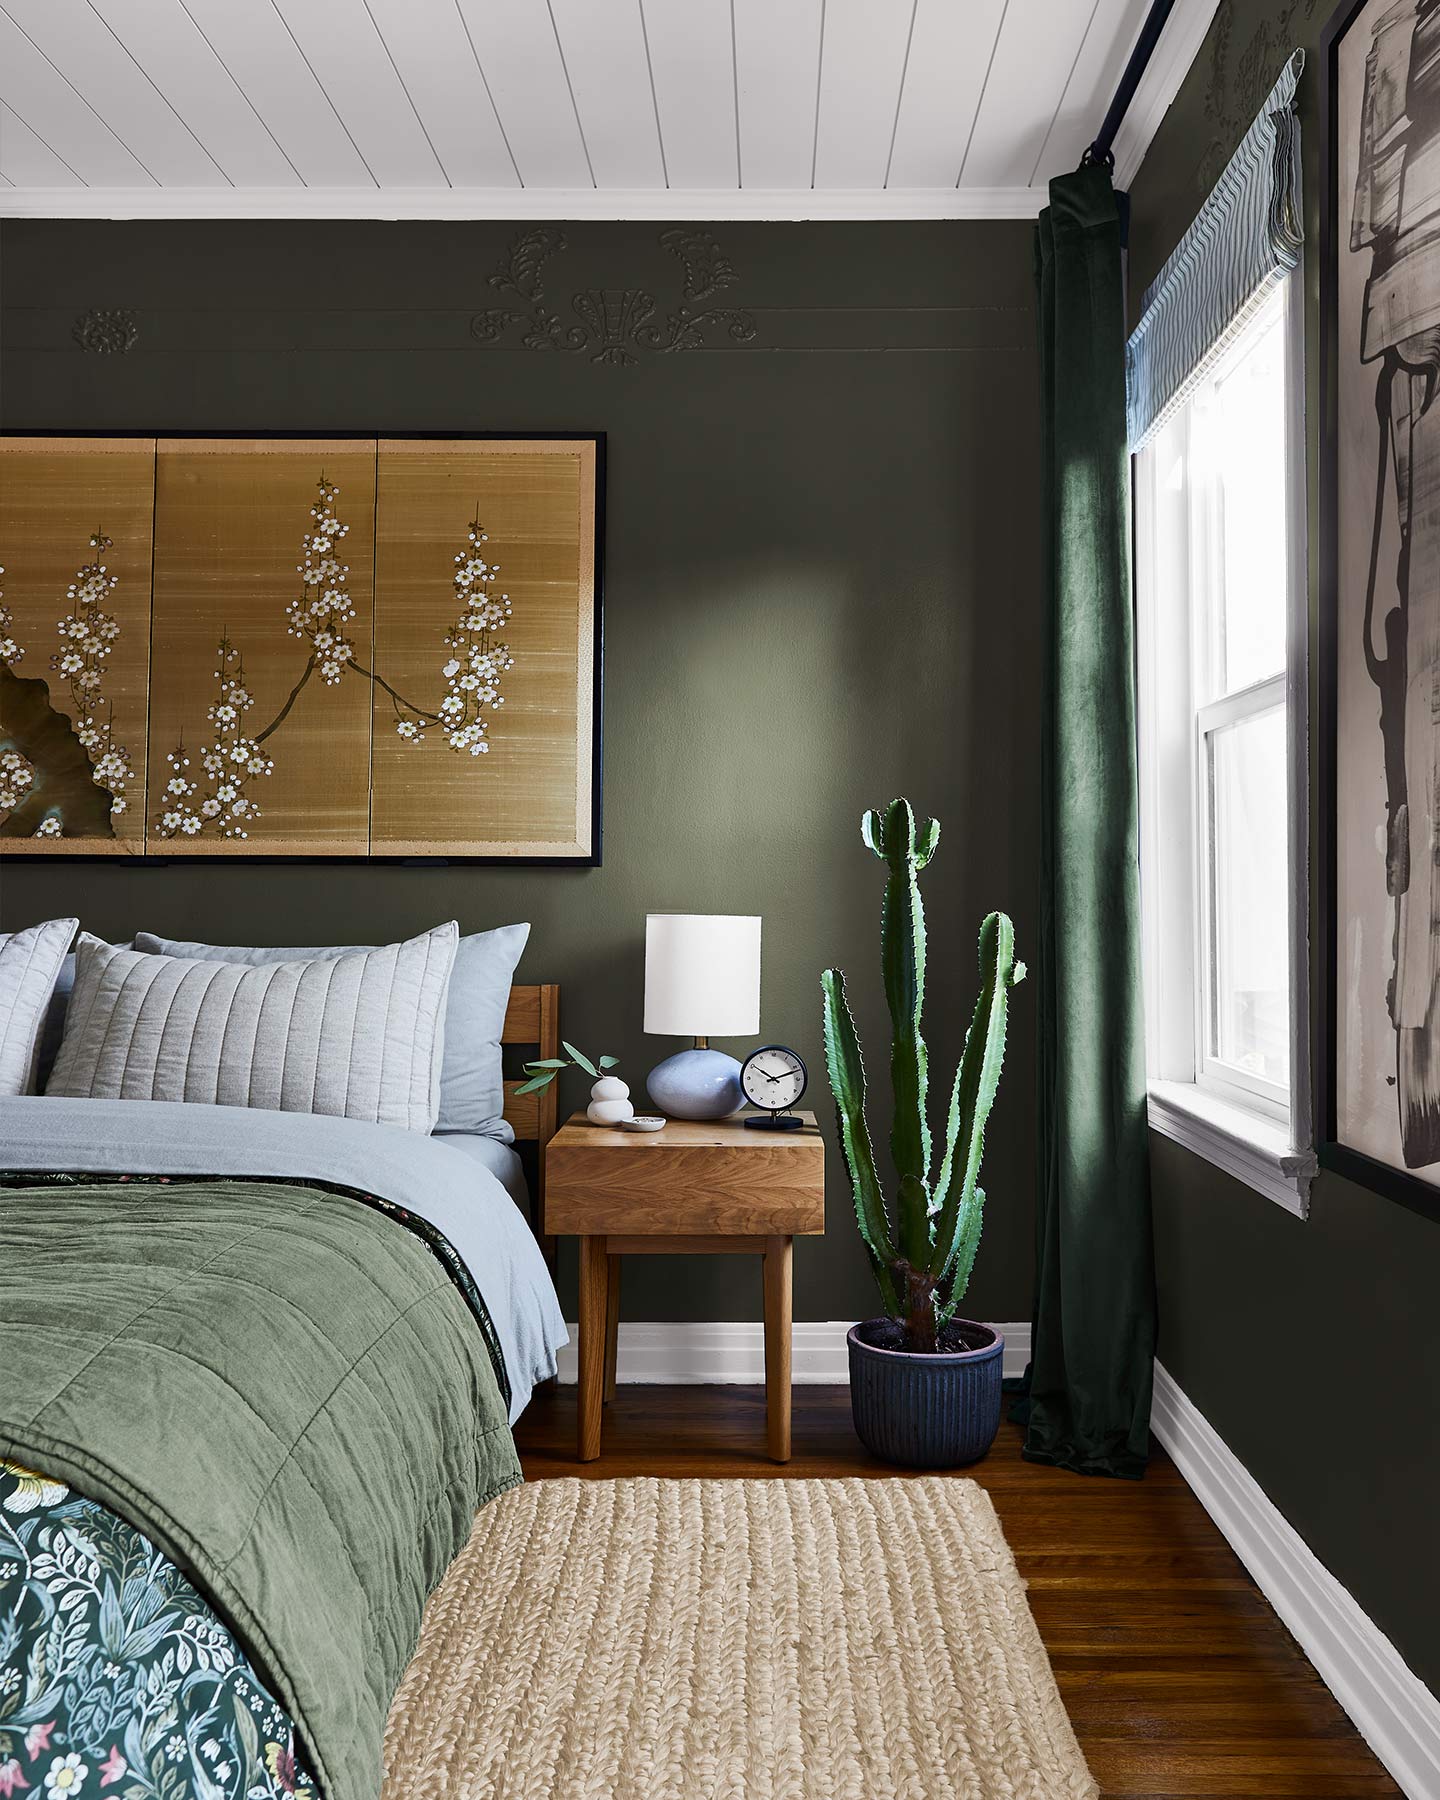 Cozy, unexpected, stylish--this dark green bedroom is a total showstopper.